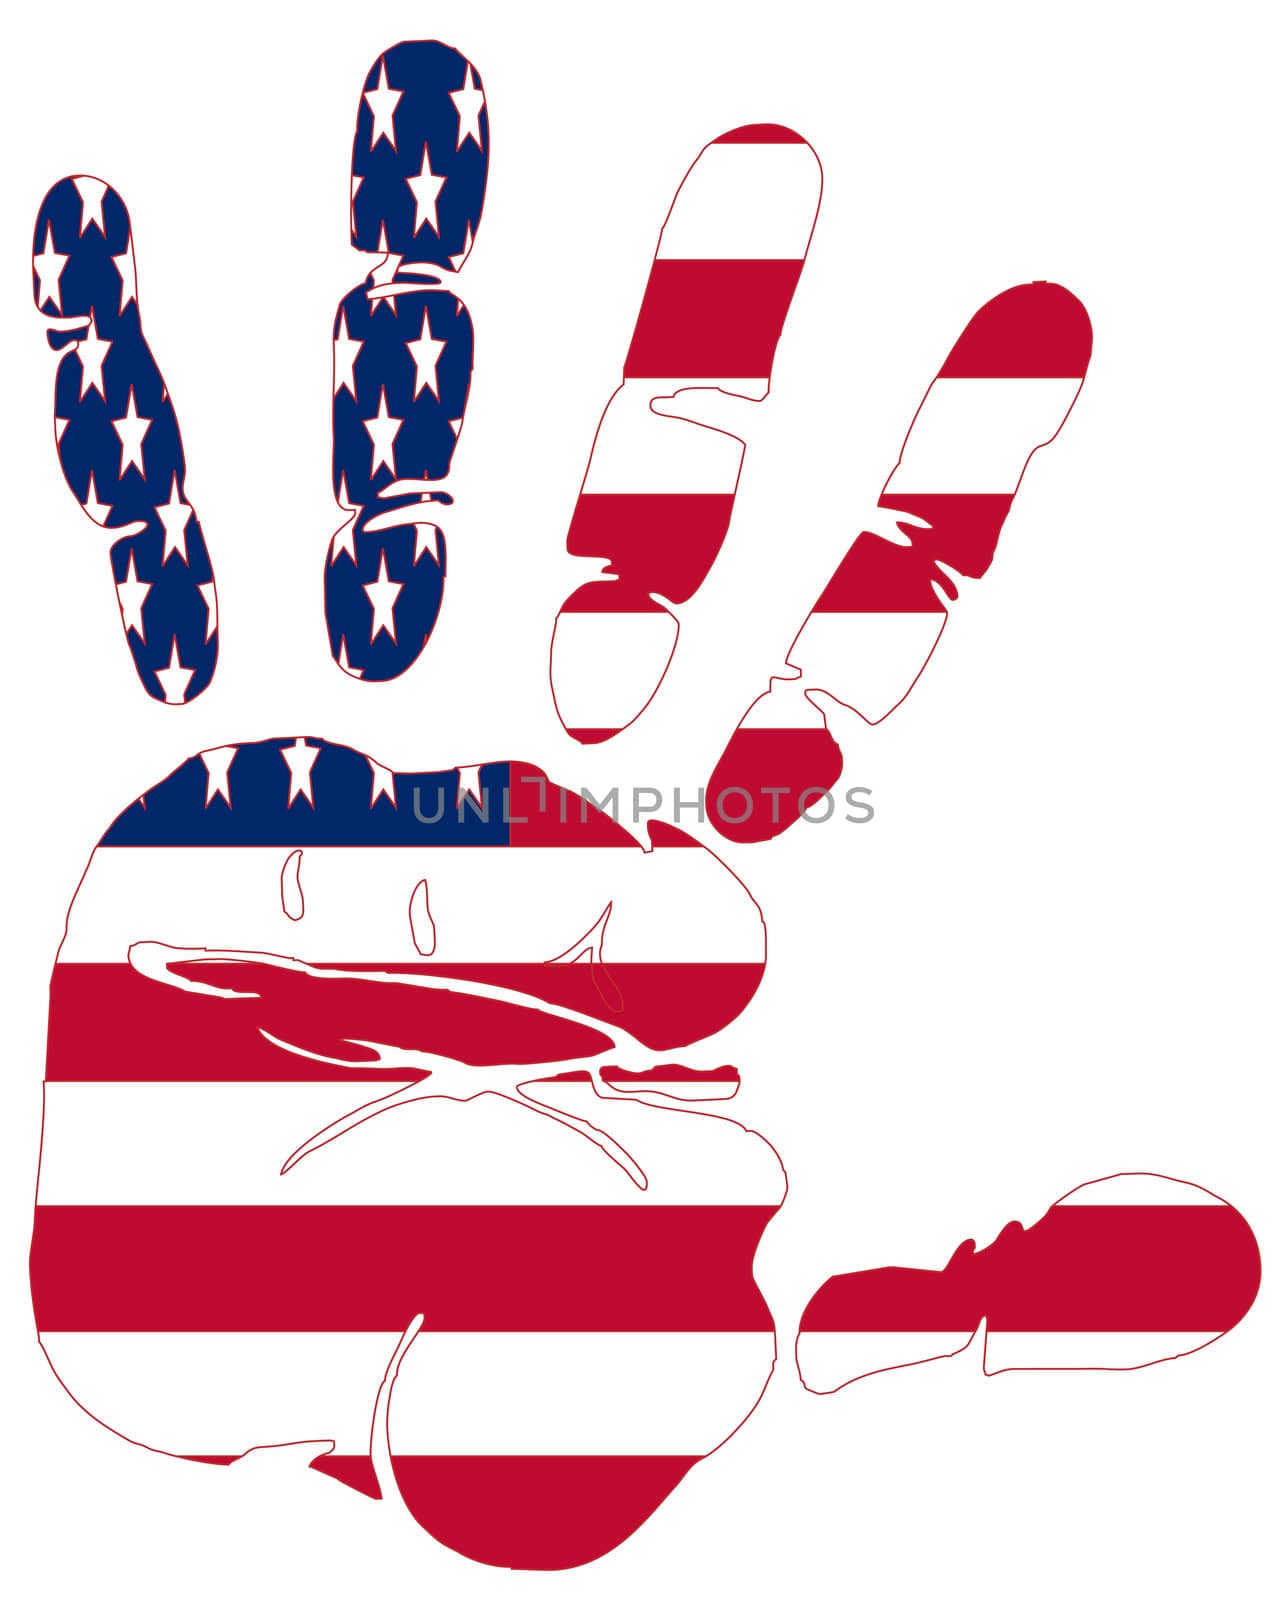 Hand print of American flag colors by nadil